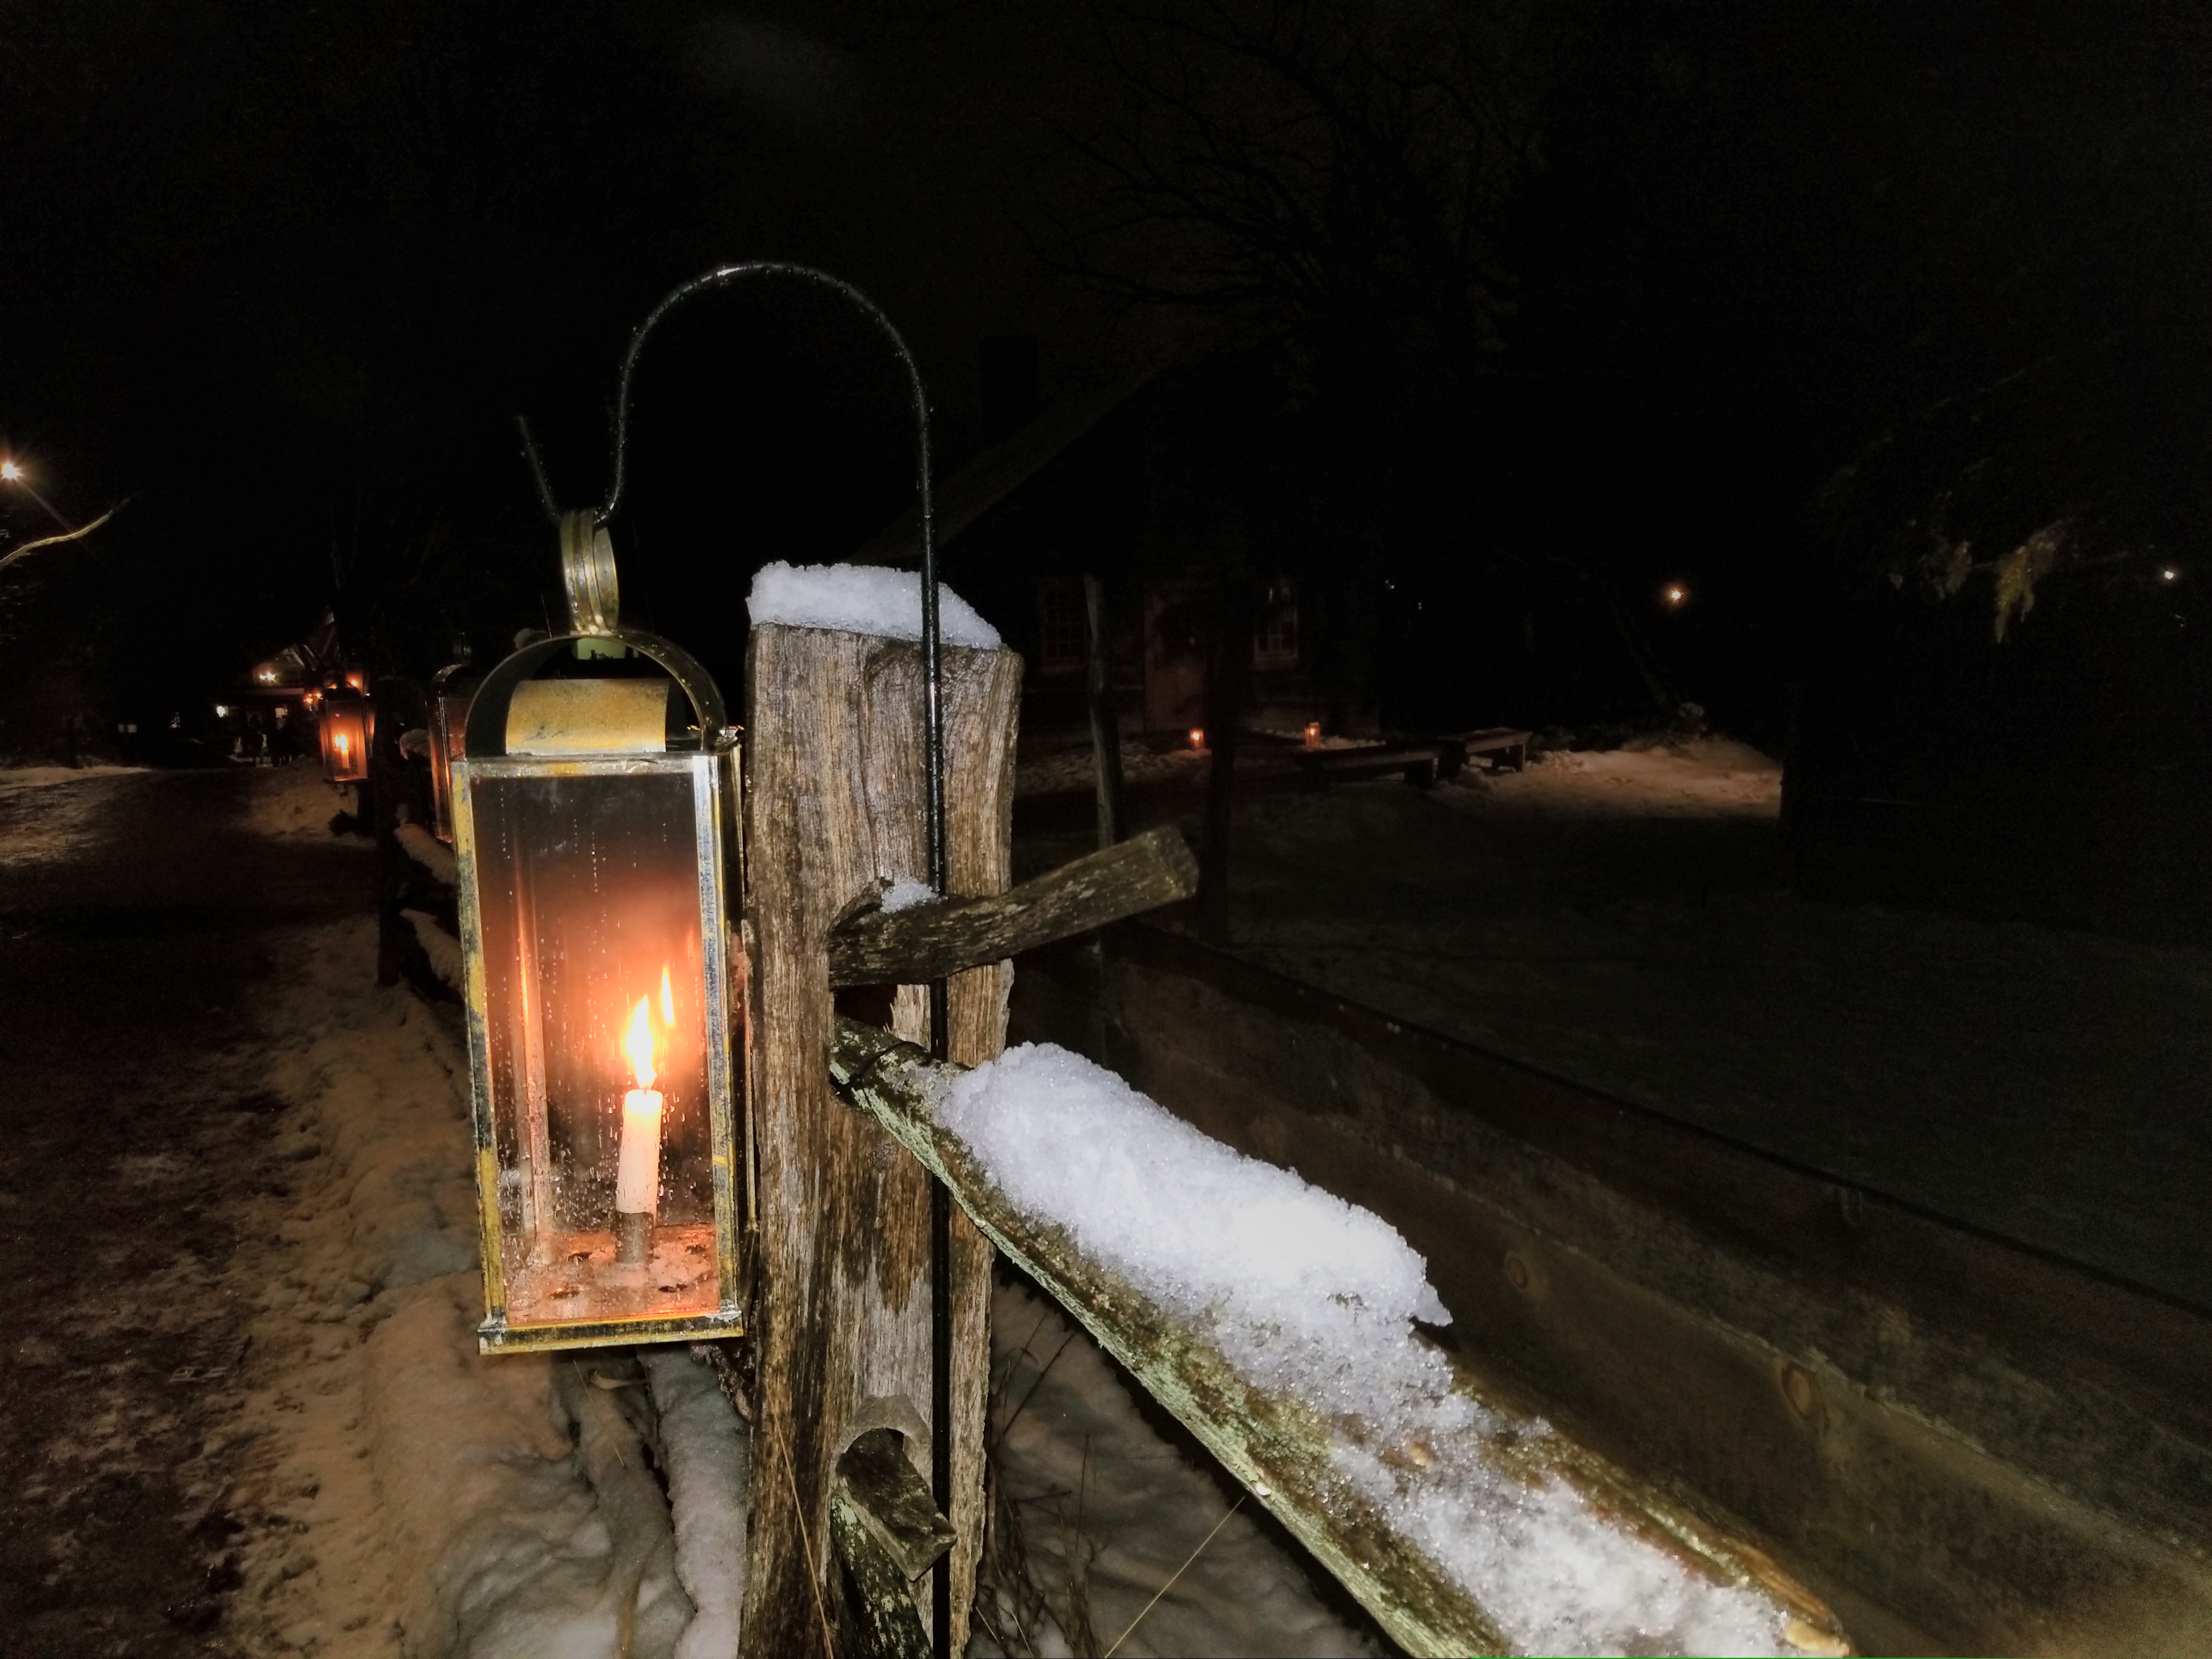 View of old fashioned candle on the street - included in the Christmas by Candlelight at Old Sturbridge Village Tour.